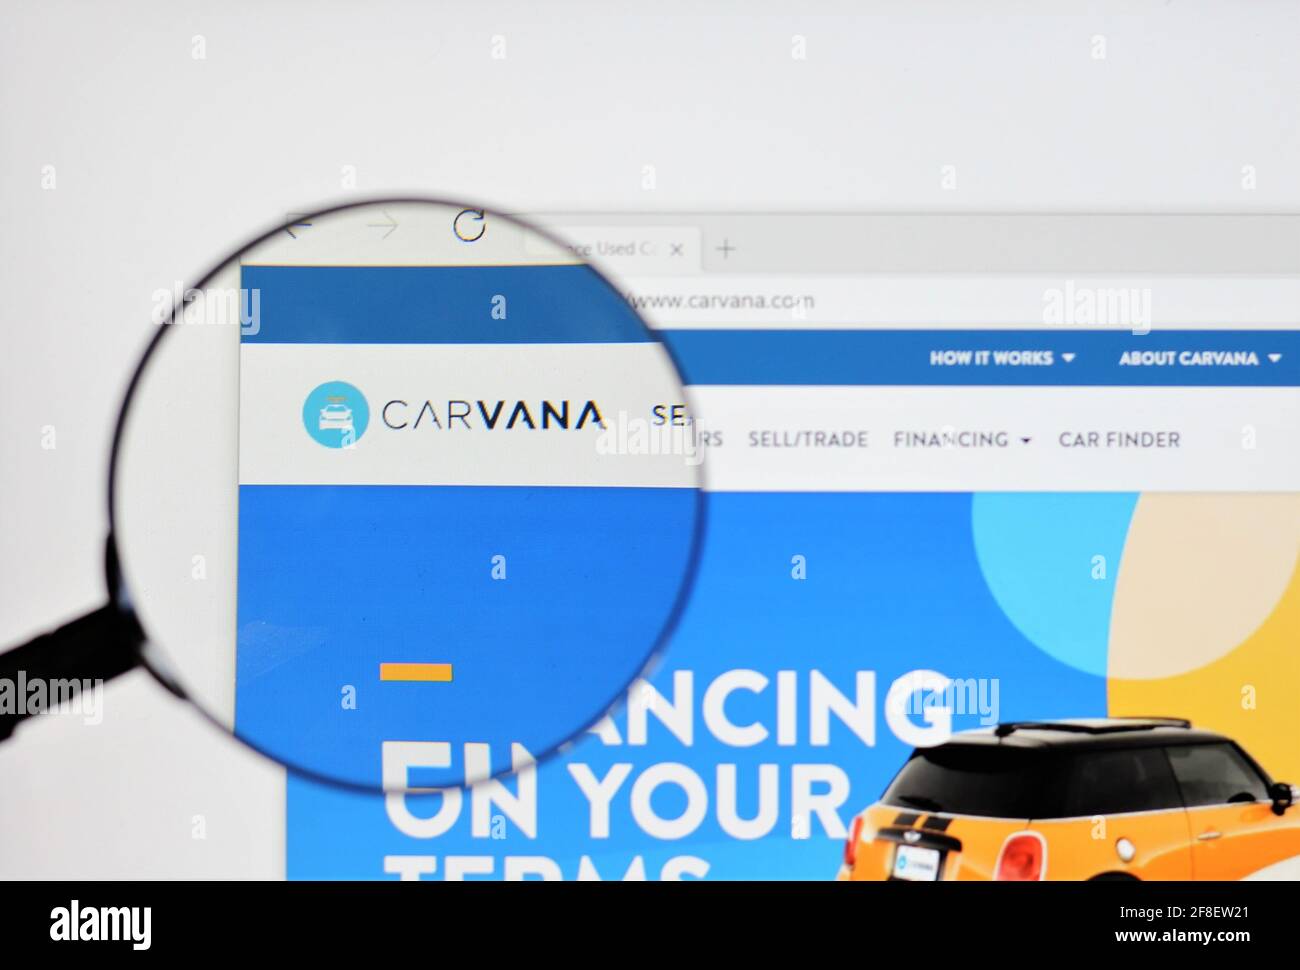 Carvana is an online used car retailer based in Tempe, Arizona. The company is known for its multi-story car vending machines. Website, online concept Stock Photo